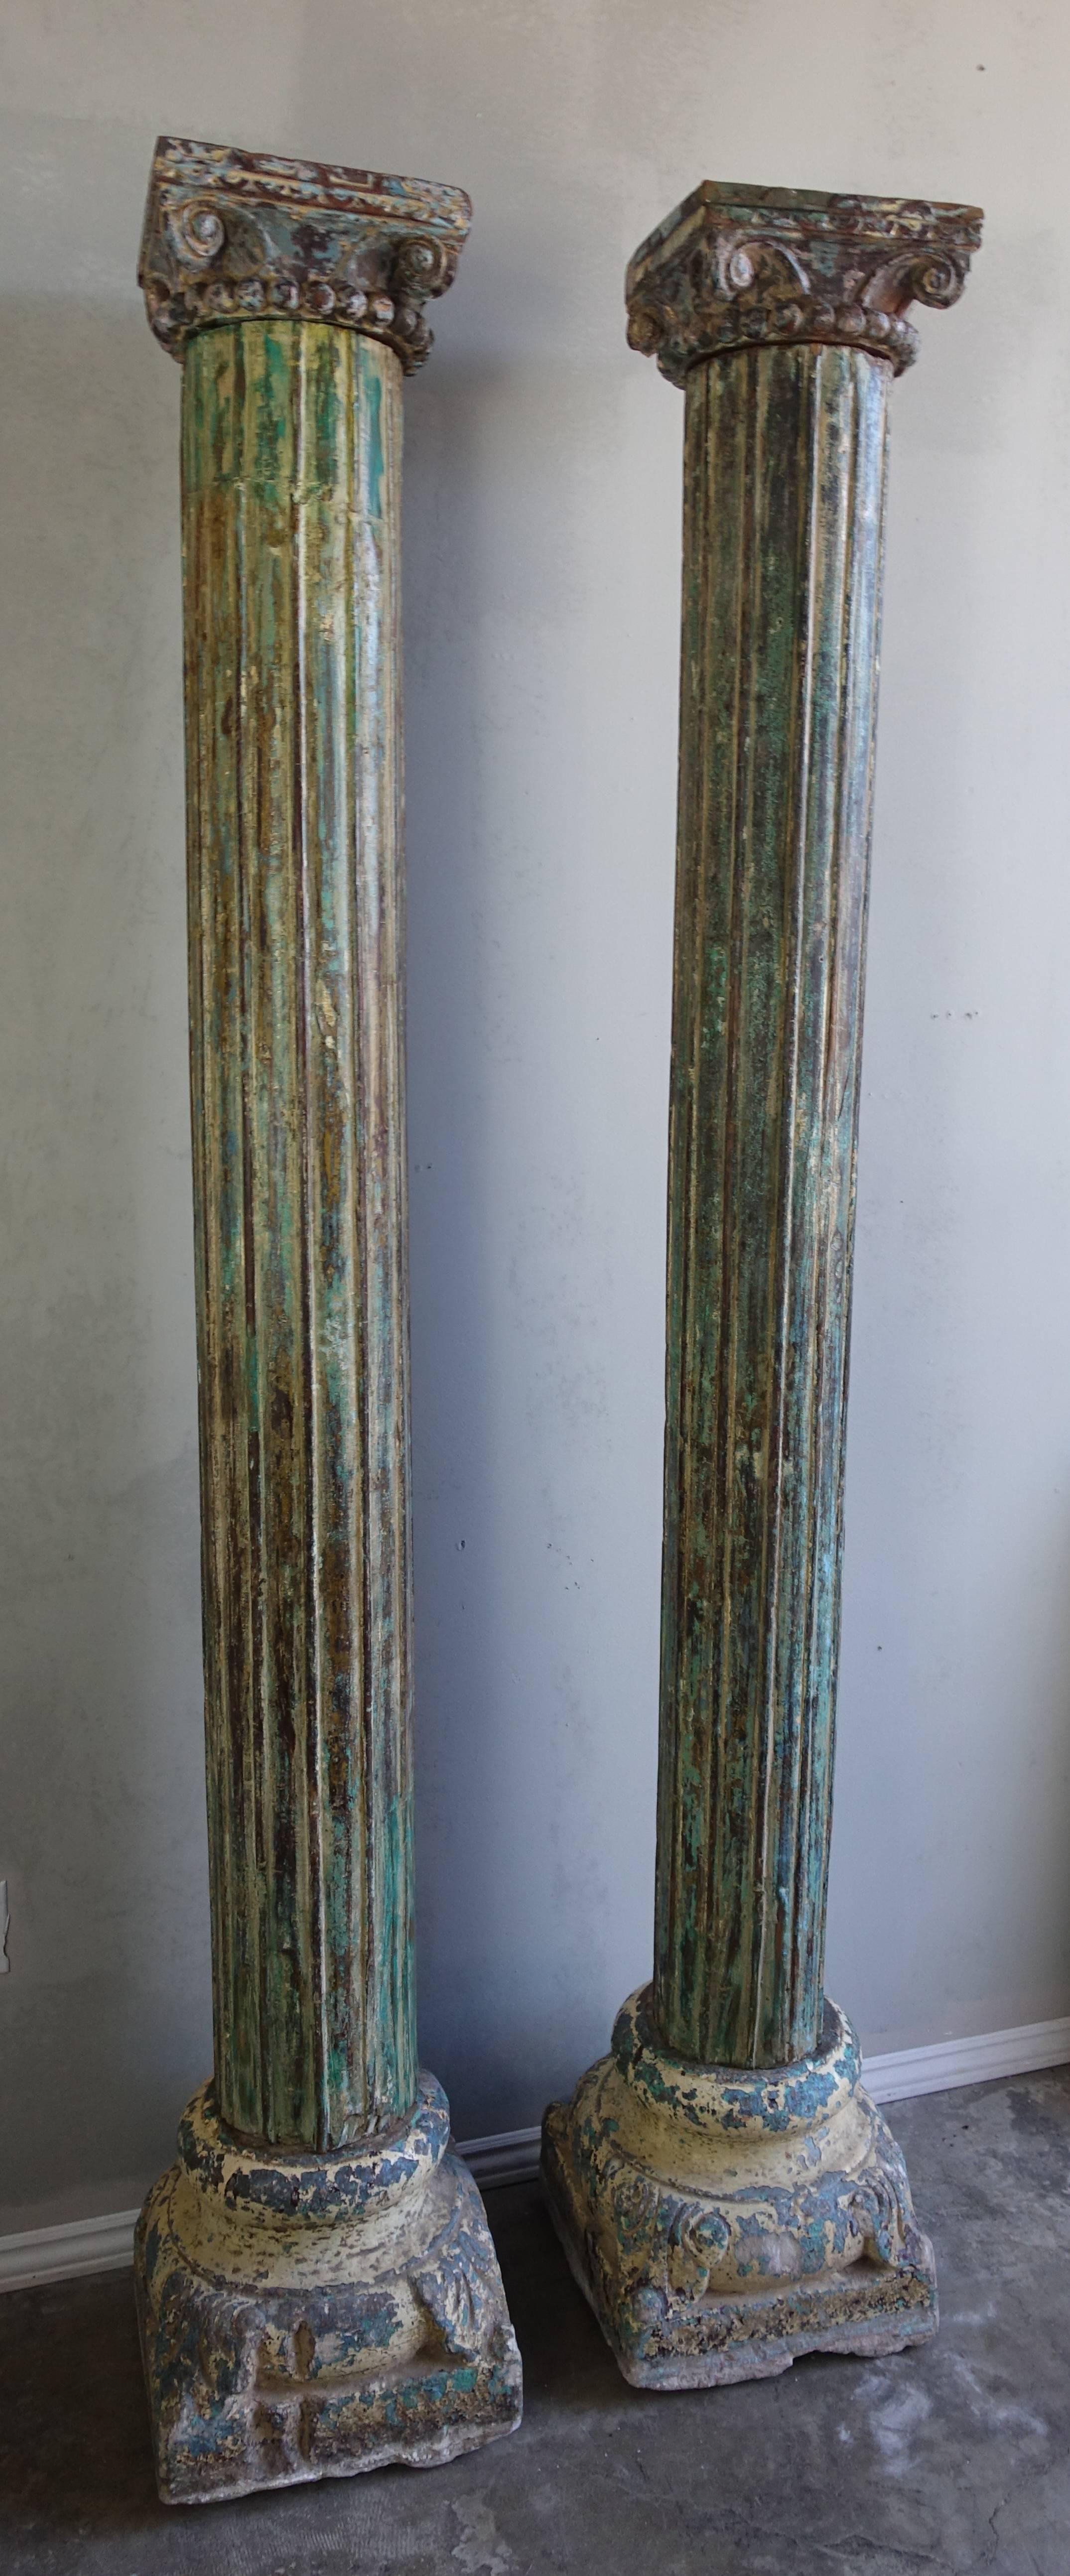 Pair of carved wood painted columns with capitals in beautiful shades of aqua, green and blue with natural wood accents showing underneath.
  